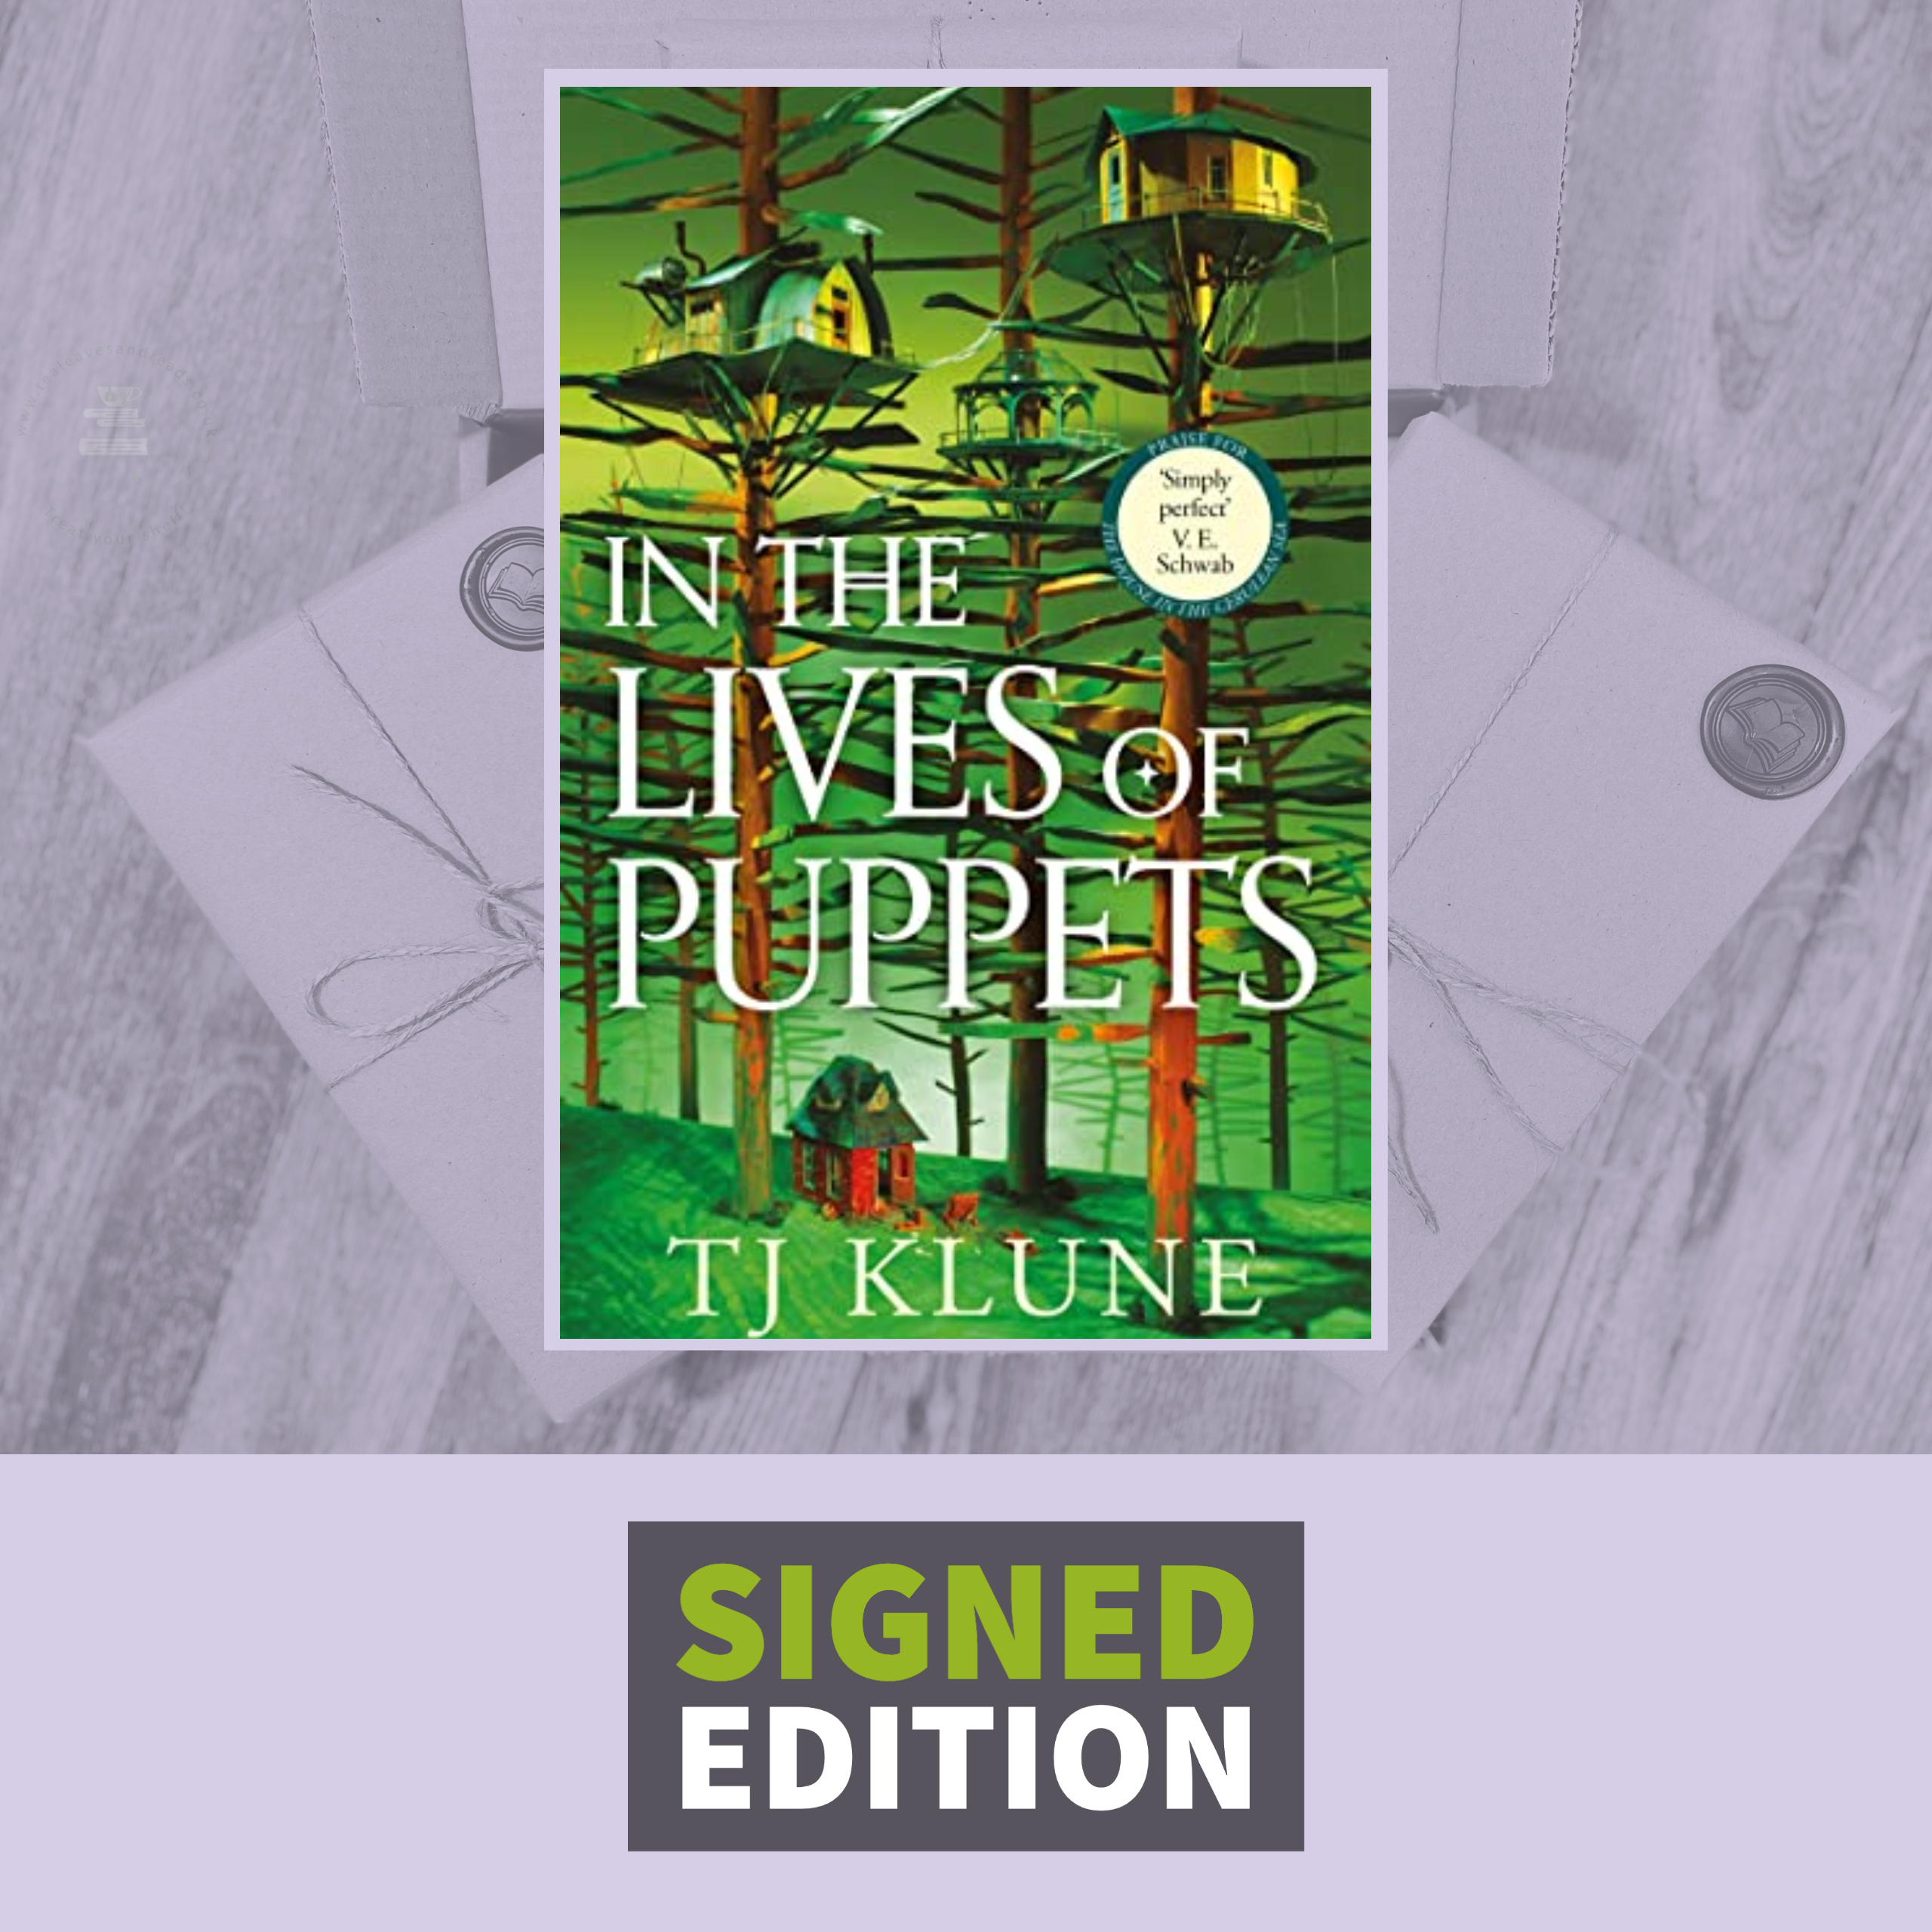 In The Lives of Puppets by T J Klune - (Signed Hardback Edition